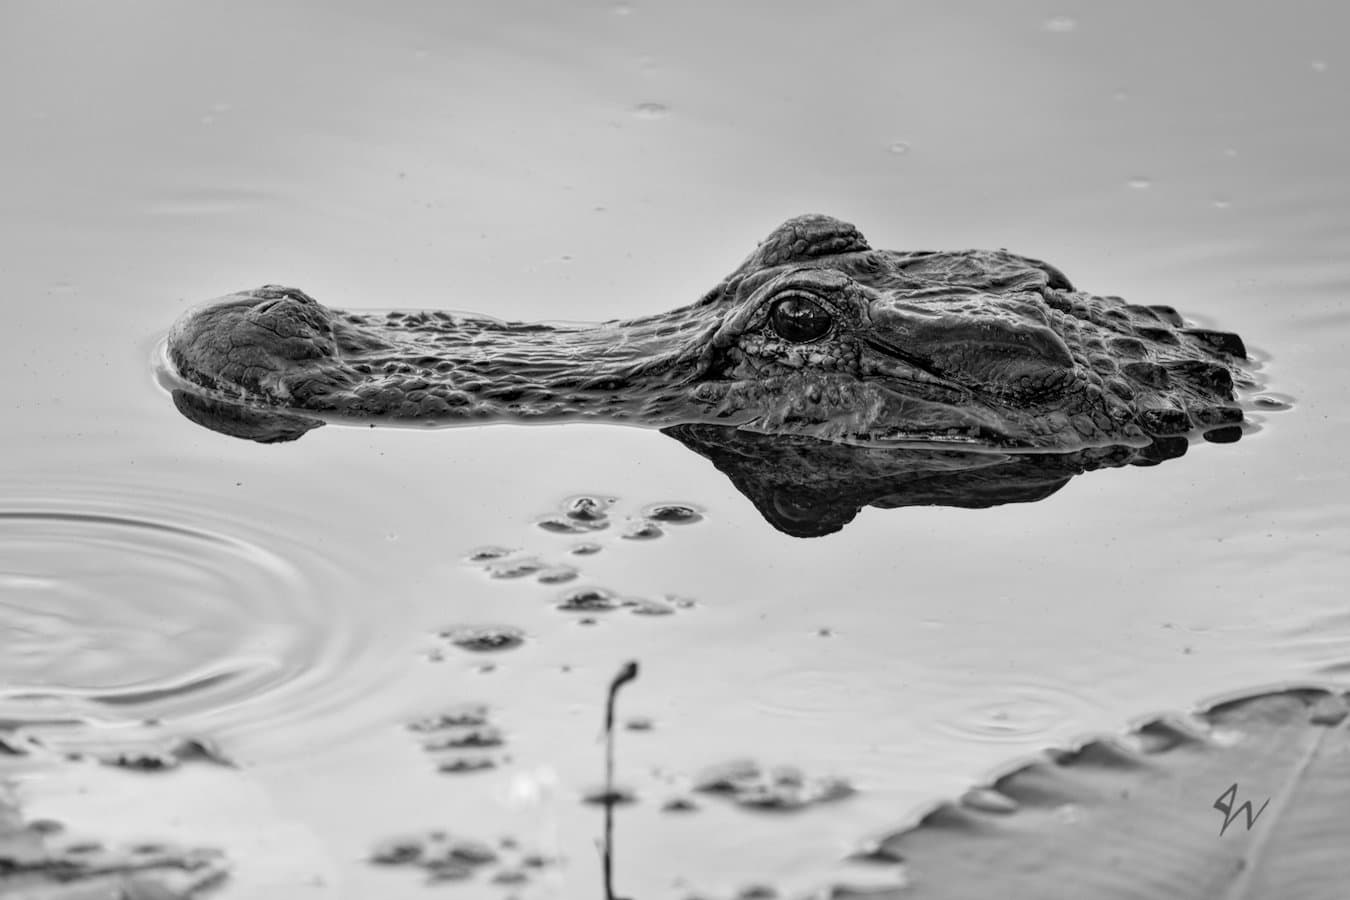 Gator head profile half submerged in lake with air bubbles and corner of lilypad in black and white.